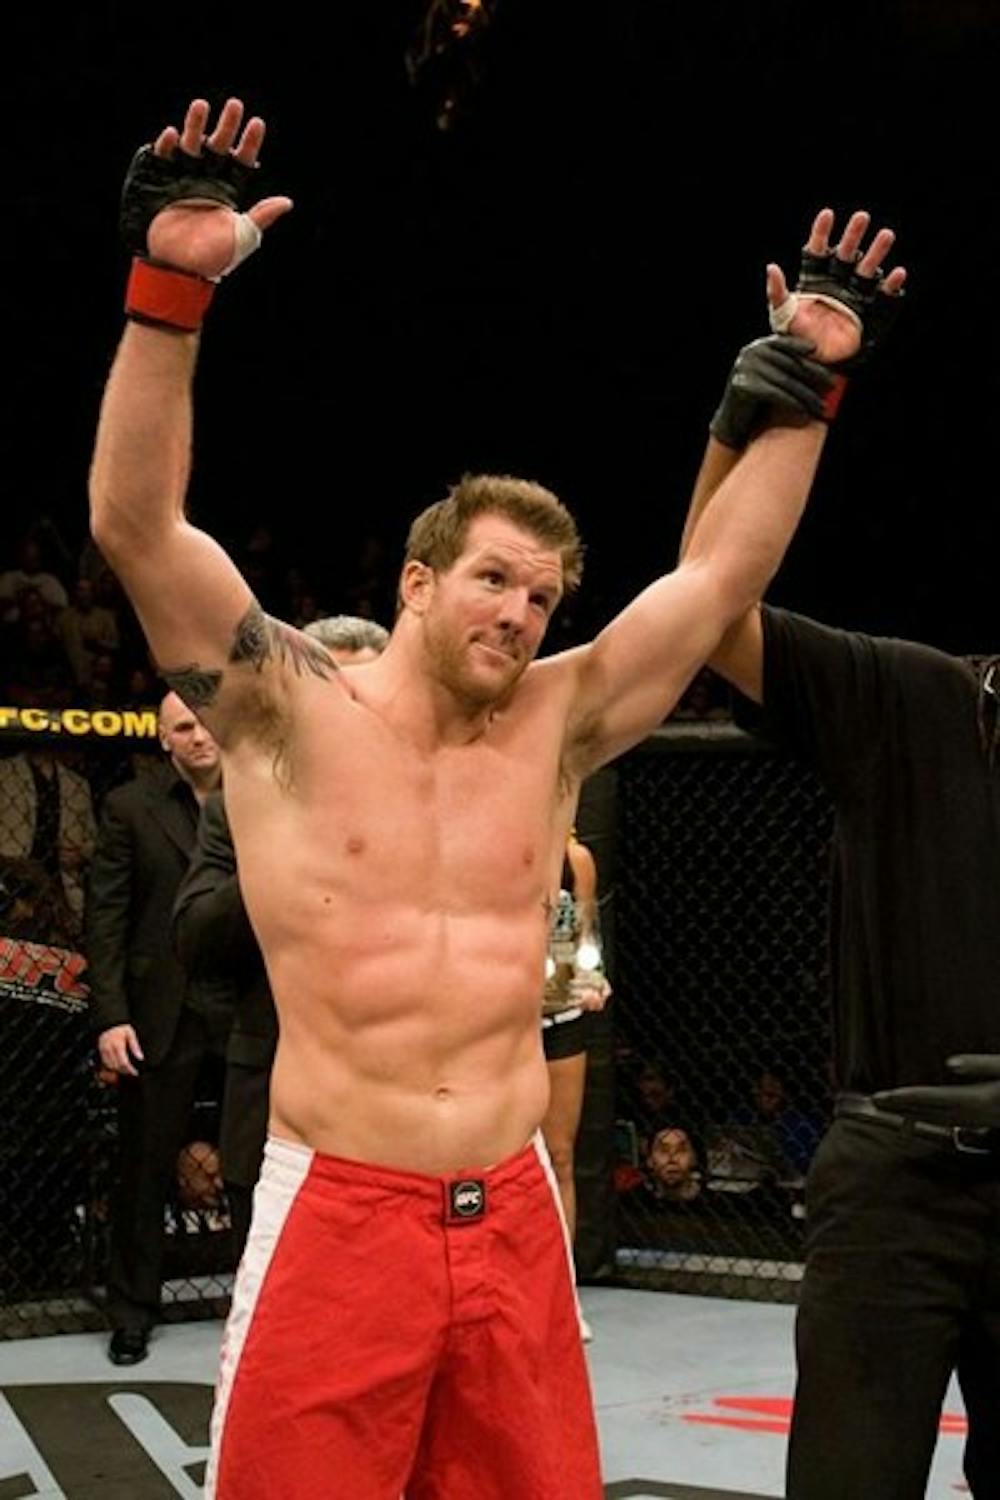 Ryan Bader raises his arms in celebration after a victory. Bader is one of several Sun Devils to make a name for himself in the world of MMA. (Photo courtesy of Ryan Bader)